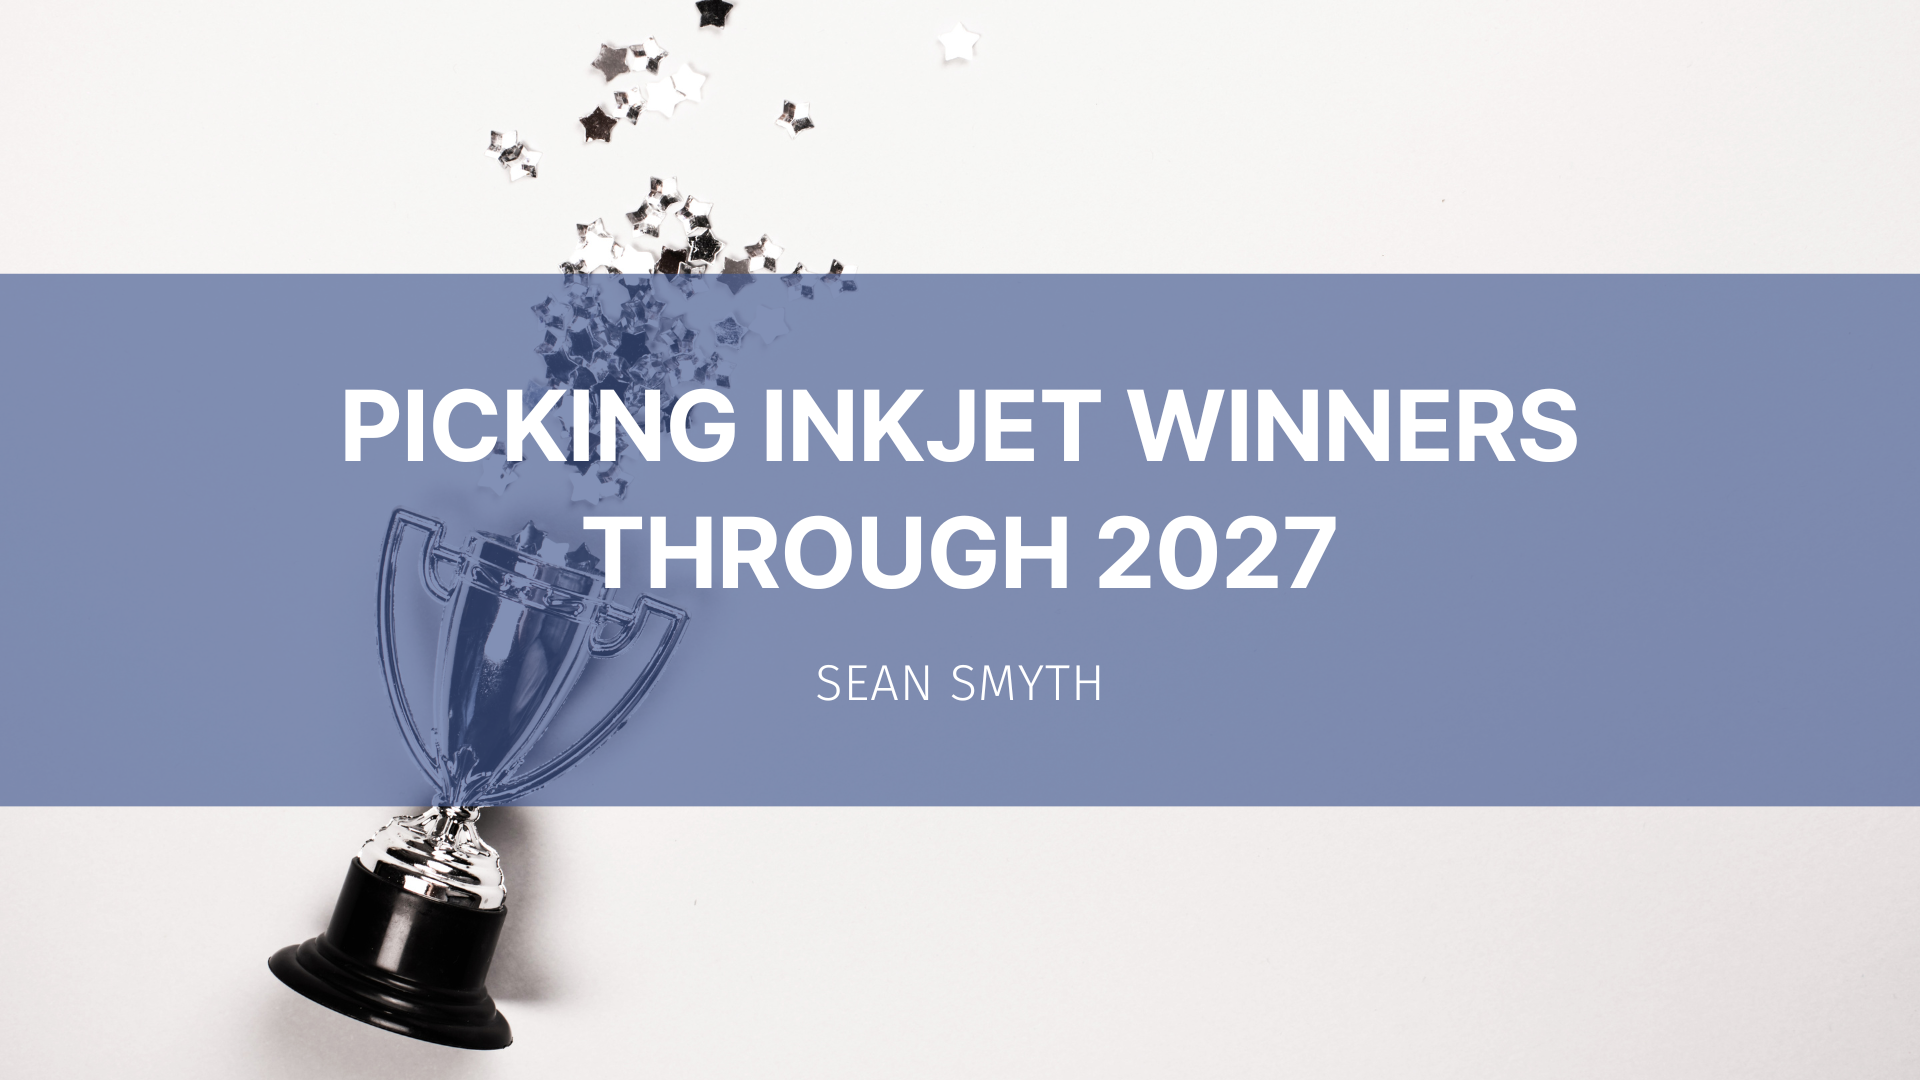 Featured image for “Picking Inkjet Winners Through 2027”